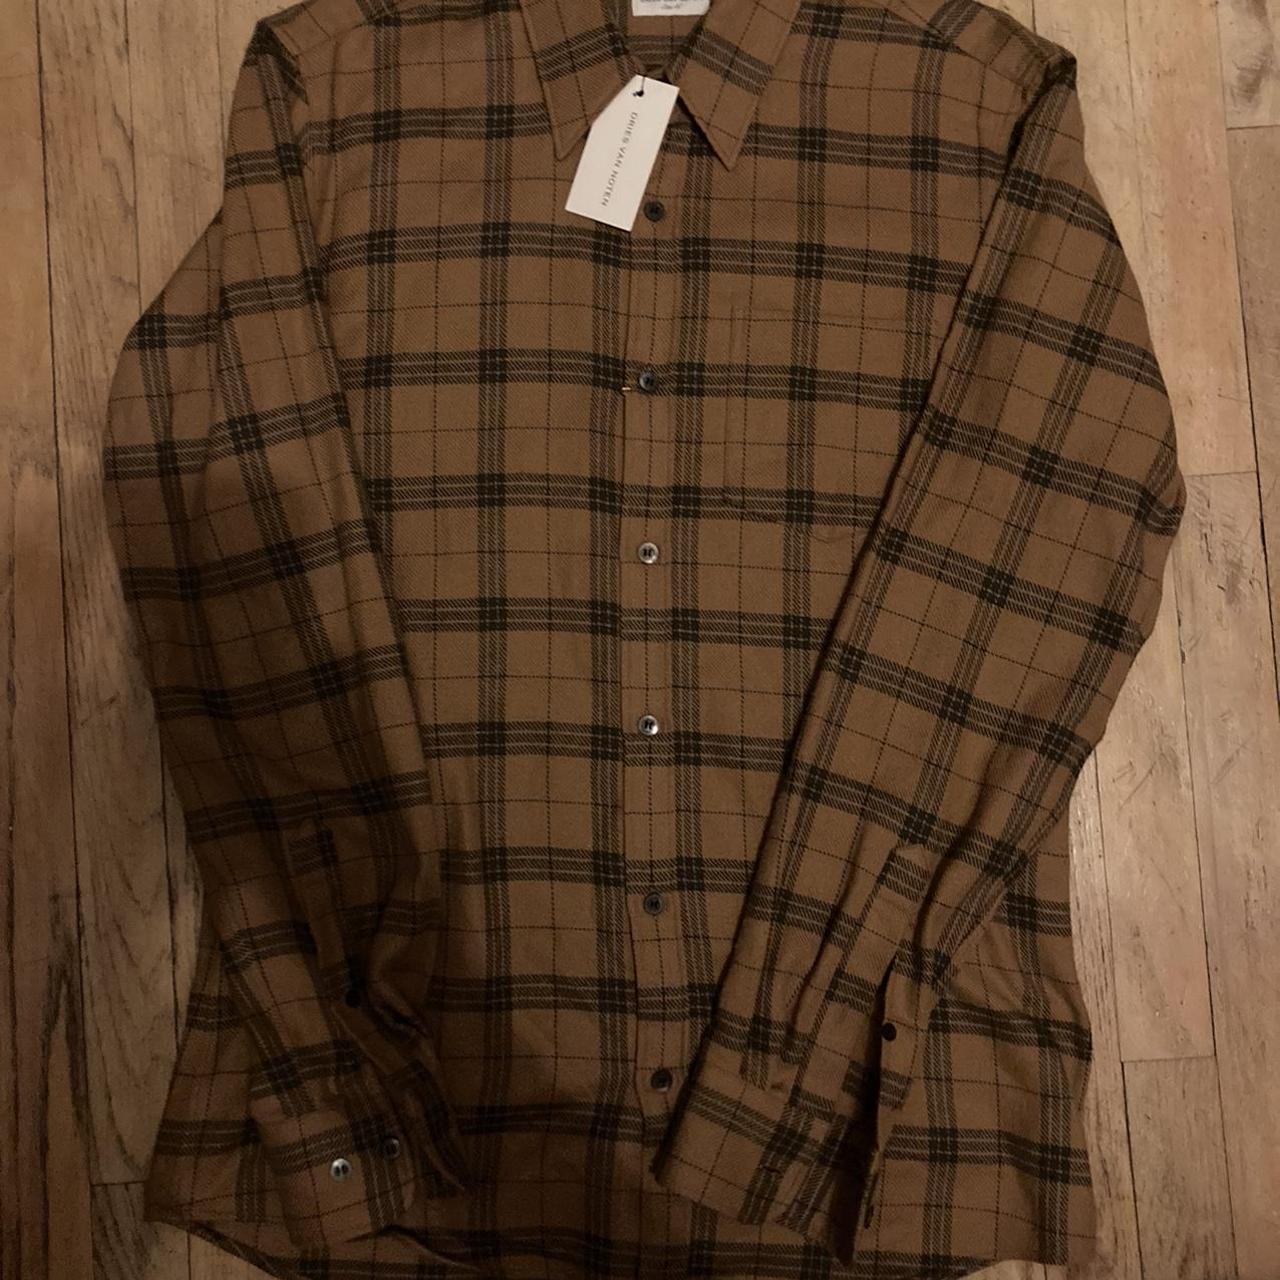 Product Image 1 - Dries Van Noten Flannel Shirt

Listed